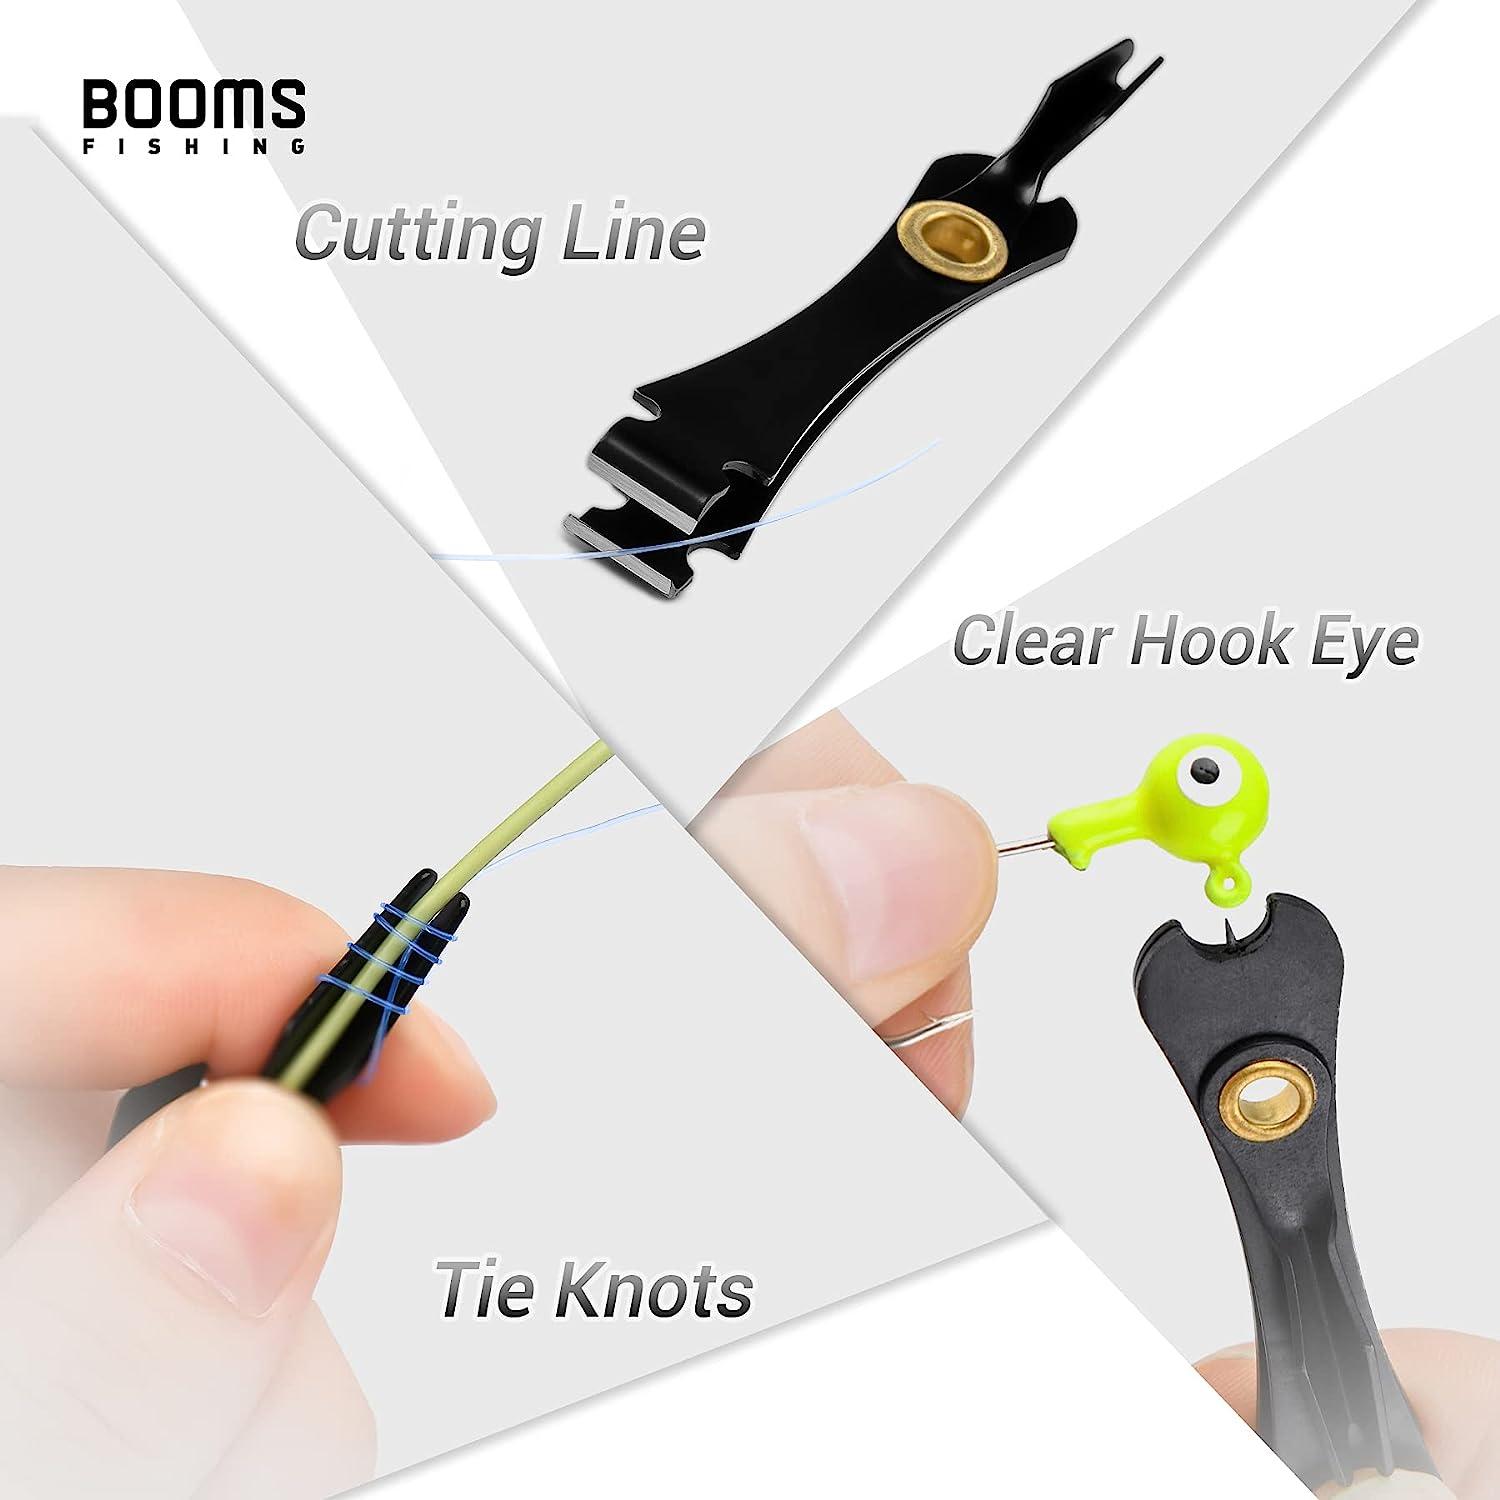 Booms Fishing FF2 Fly Fishing Accessories and Tools Kit, Fly